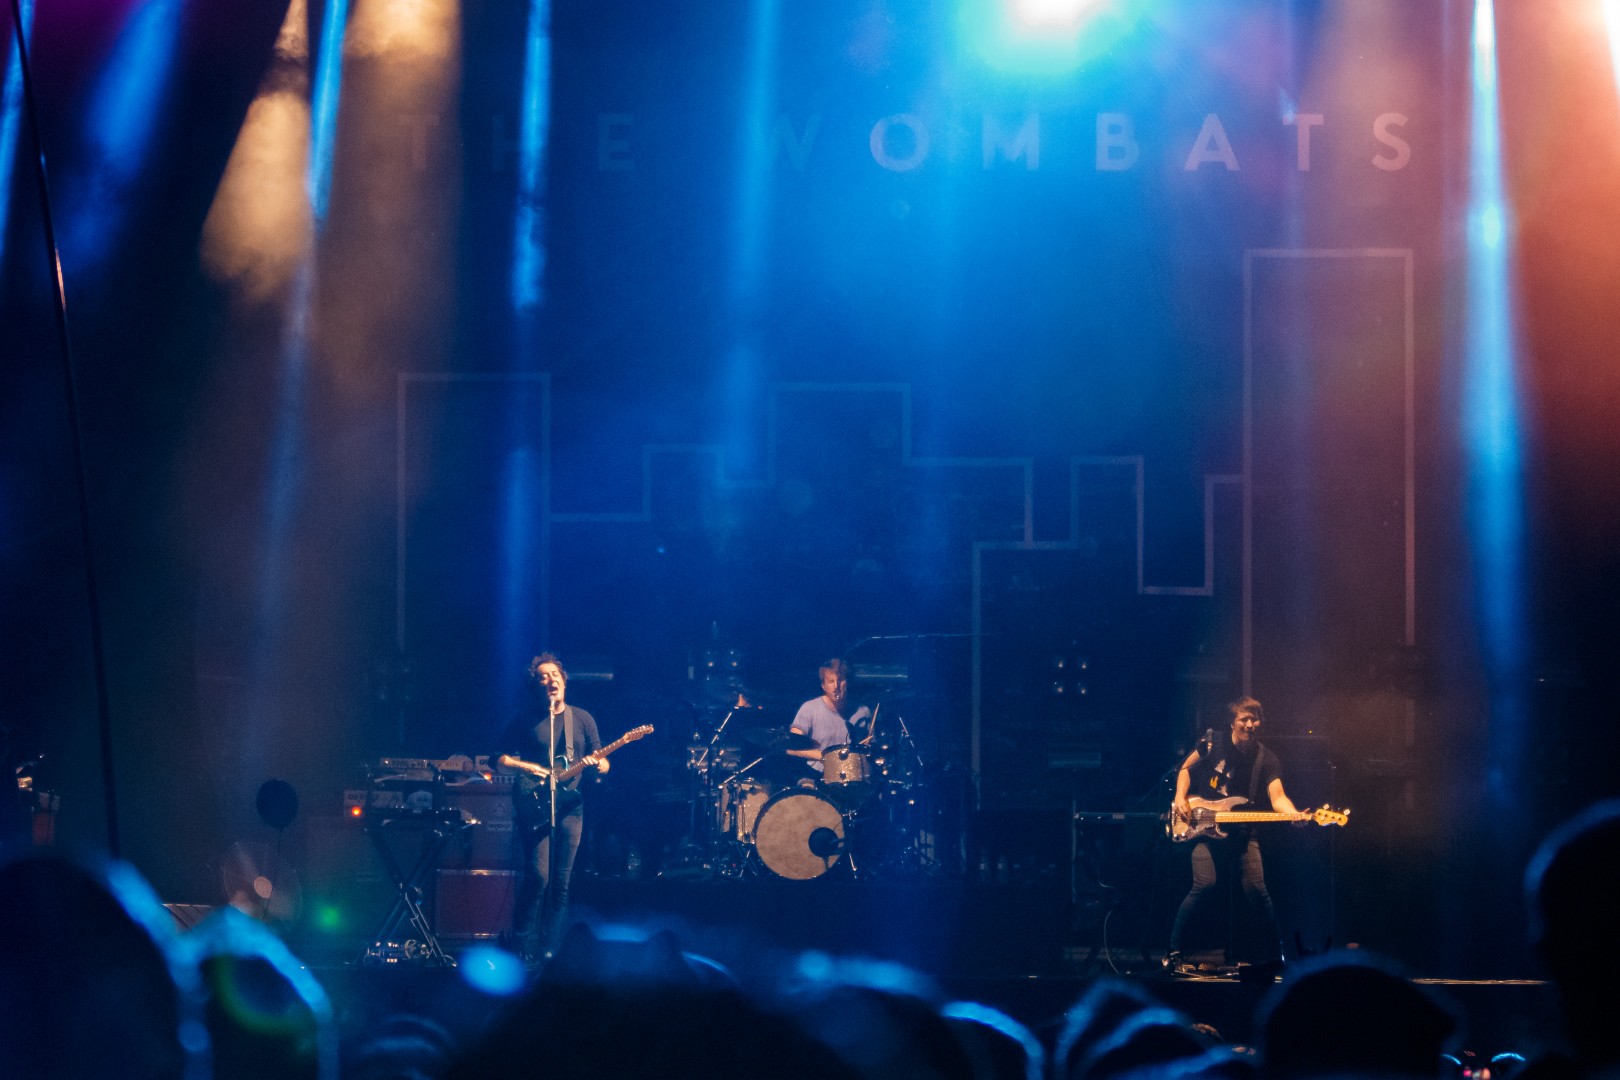 The Wombats at Domeniul Stirbey in Buftea on August 9, 2015